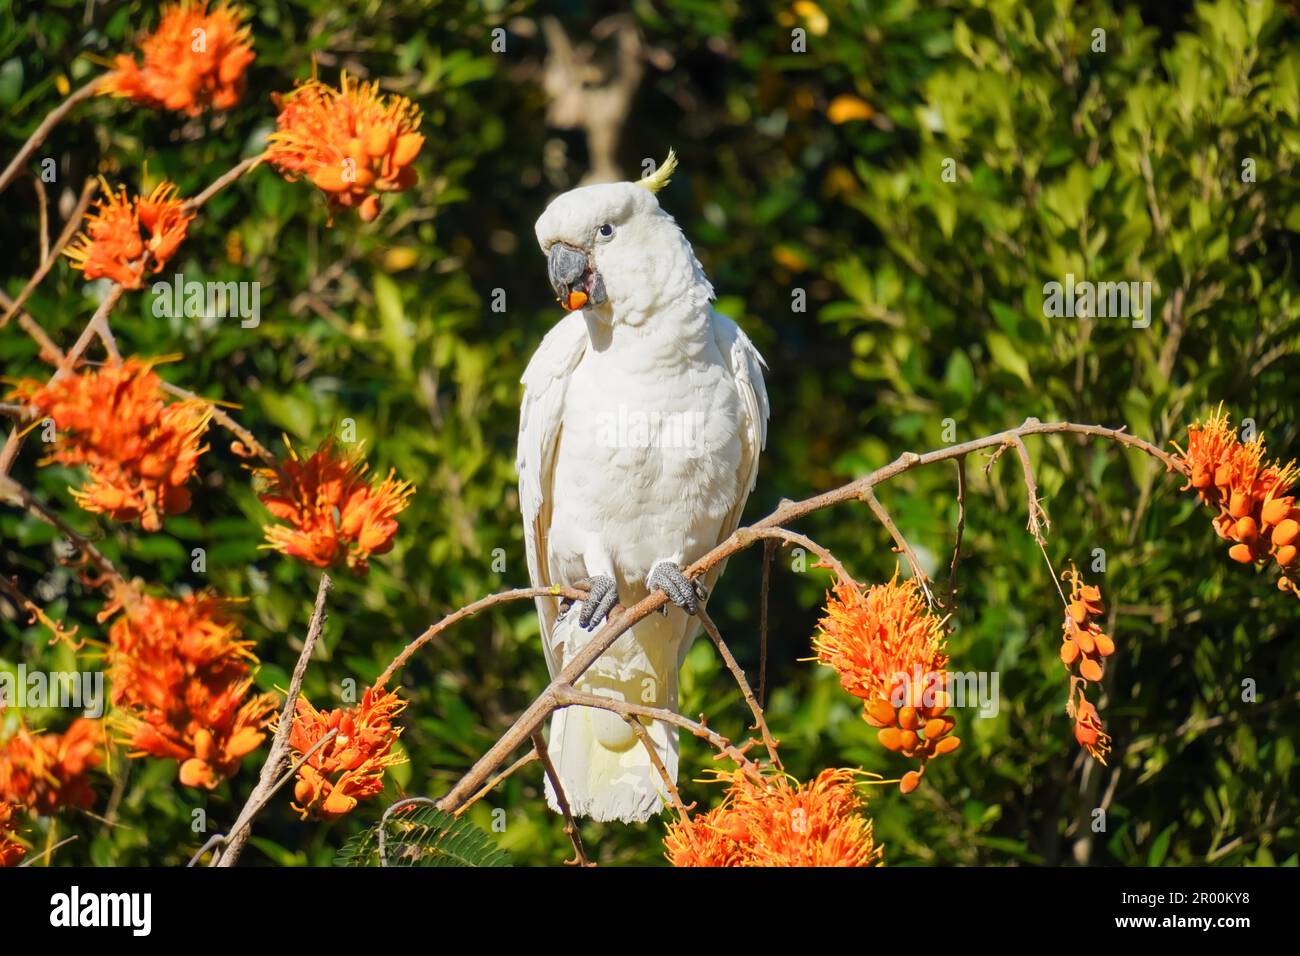 A white cockatoo sitting in a Colville's Glory Tree enjoying the orange seeds the tree offers. Stock Photo